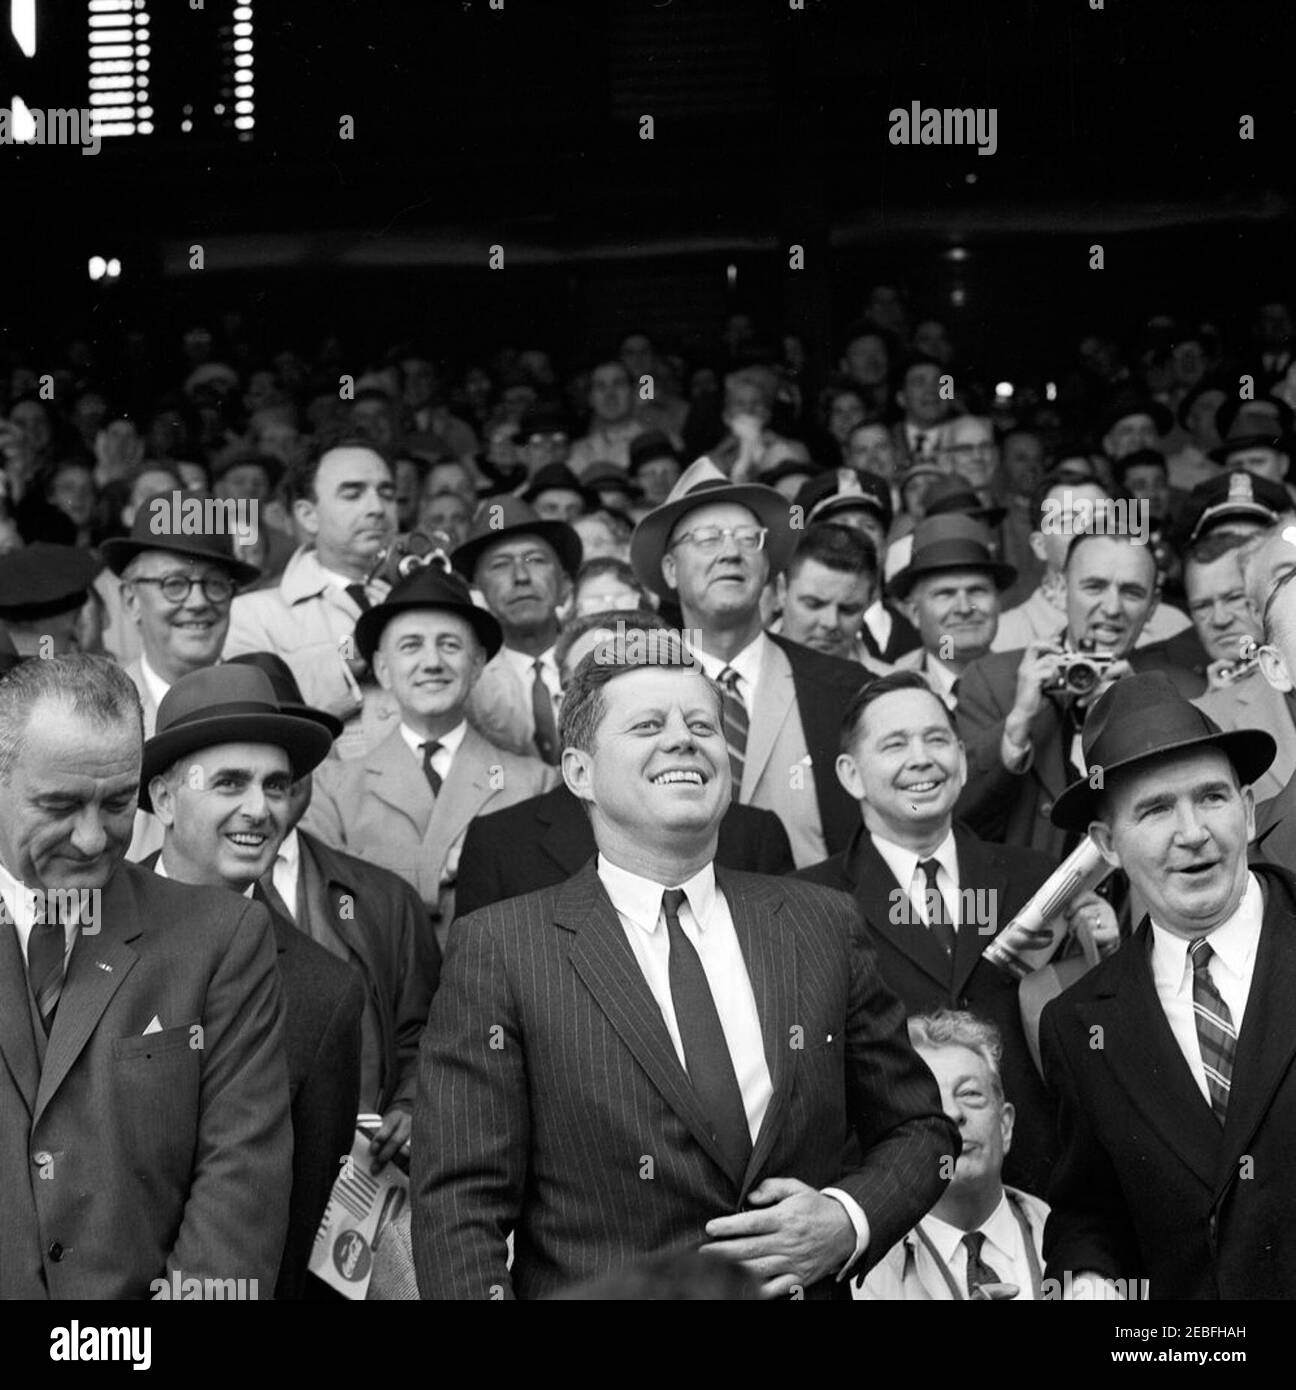 Opening Day of the 1961 Baseball Season, 1:10PM. President John F. Kennedy and others laugh during the opening game of the 1961 baseball season at Griffith Stadium, Washington, D.C. Audience includes Vice President Lyndon B. Johnson; Special Assistant to the President Dave Powers; Secretary of Health, Education, and Welfare Abraham Ribicoff; Representative Carl Albert of Oklahoma; Senate Minority Leader Everett Dirksen of Illinois. Stock Photo